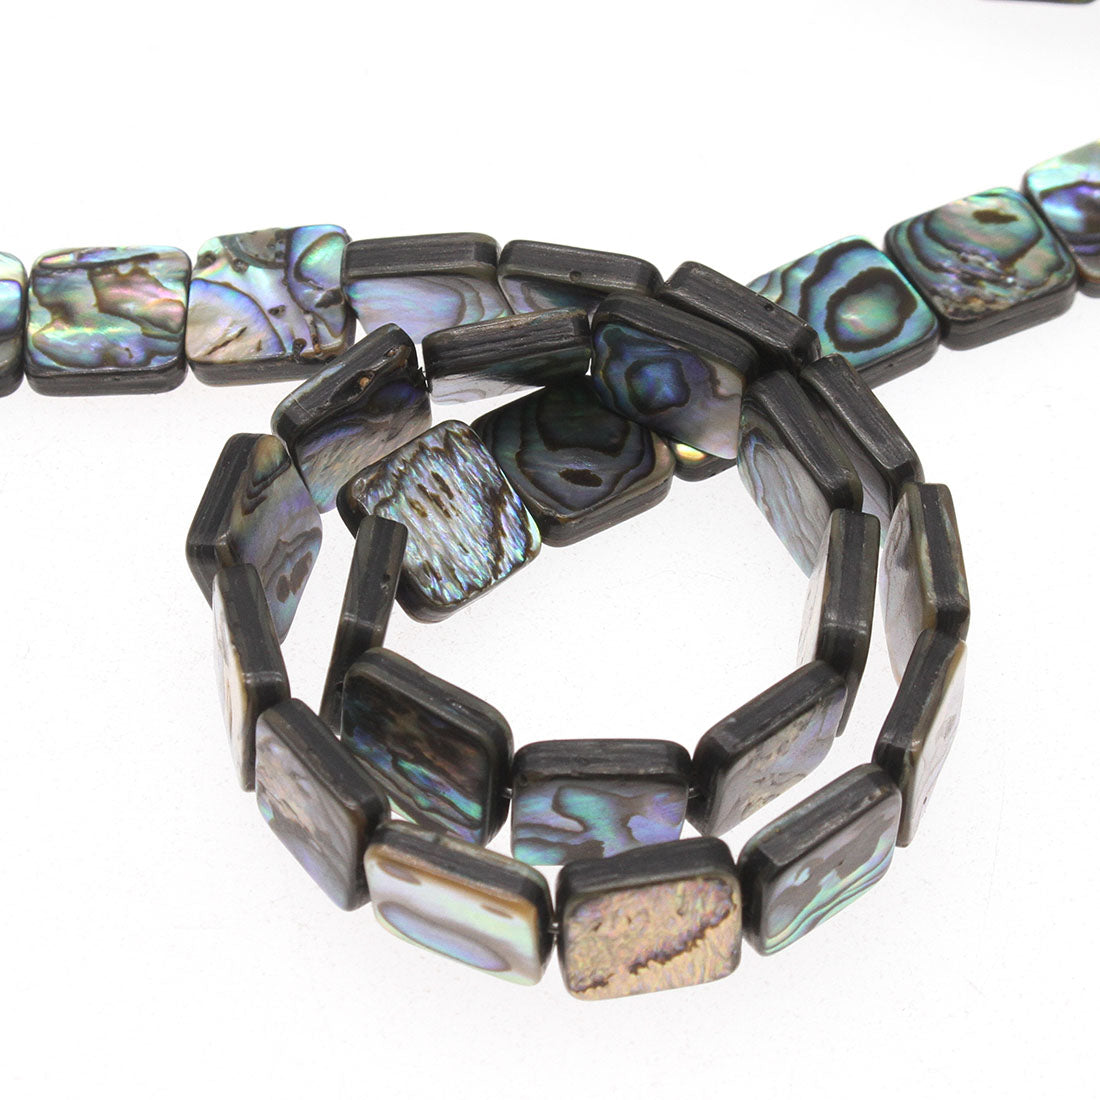 Abalone Shell Beads - Square - 10mm Weight: 41 Grams per Strand - NEW421